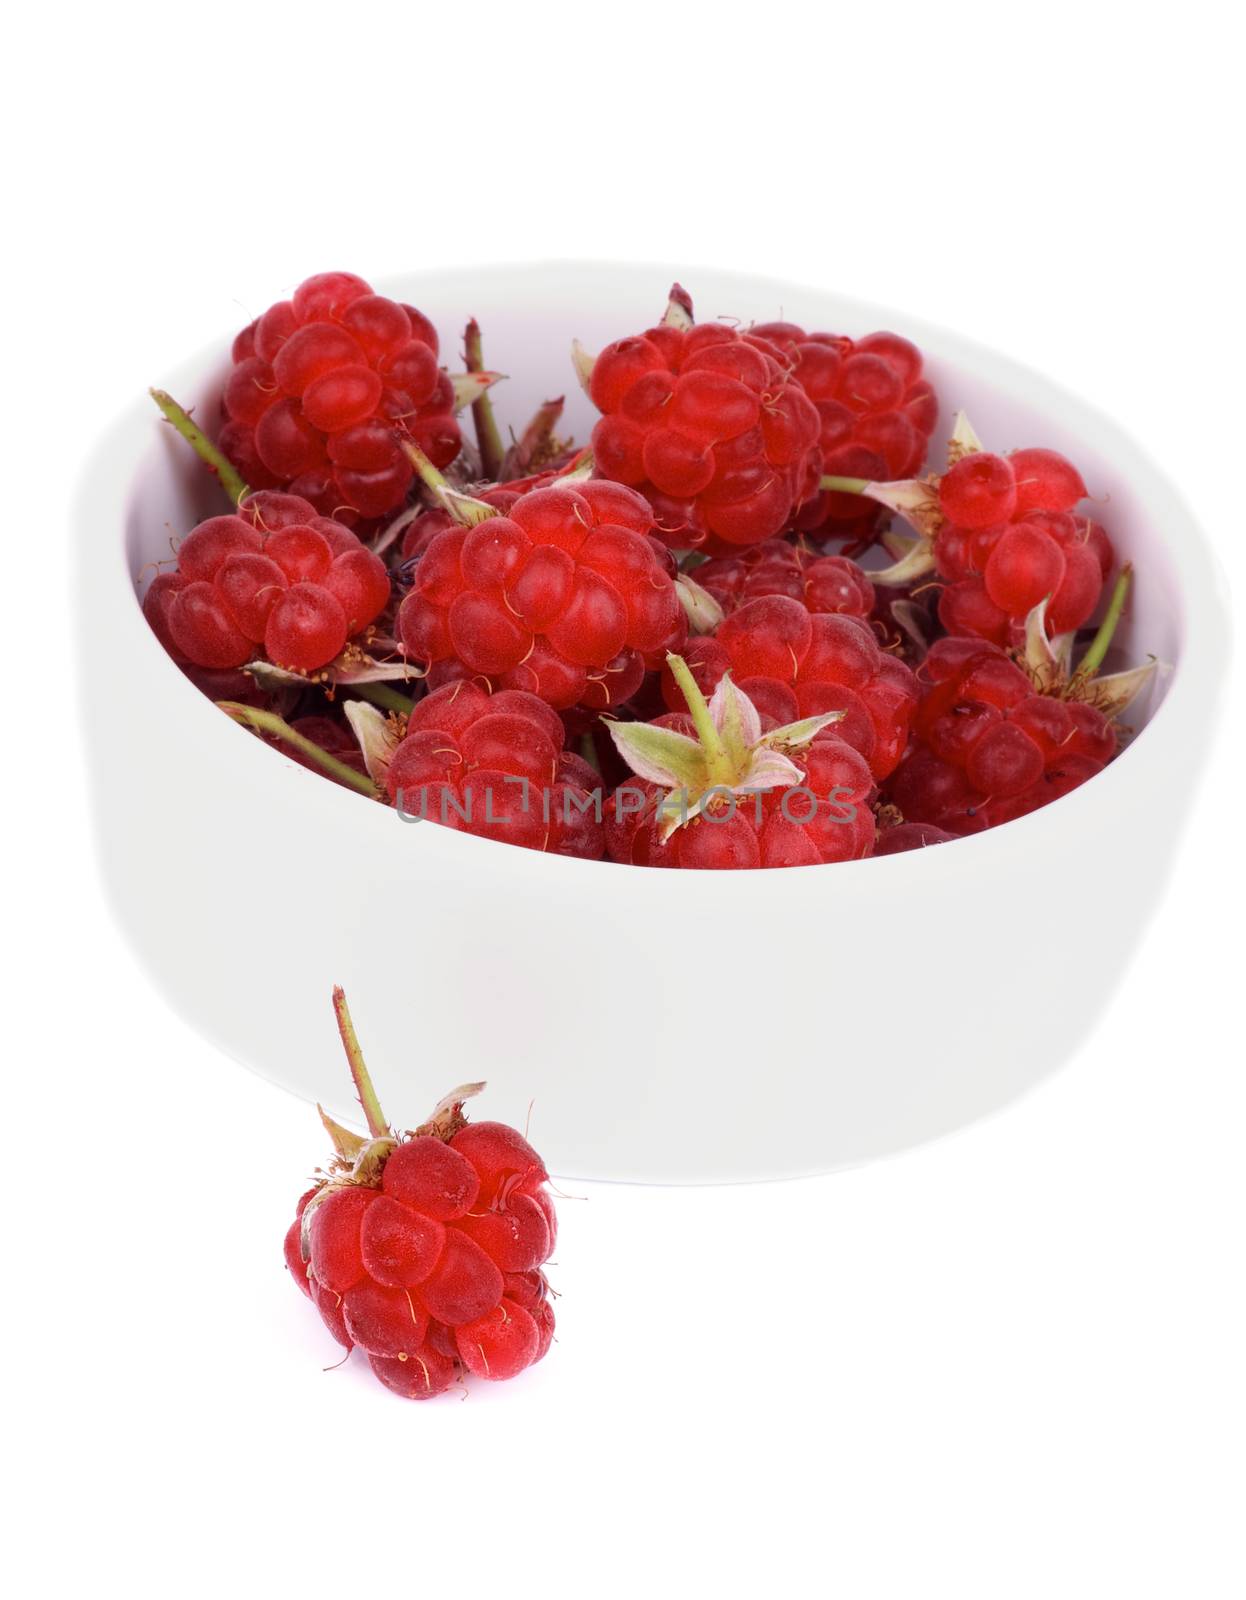 Juicy Raspberries with Fruit Stems in White Bowl isolated on white background